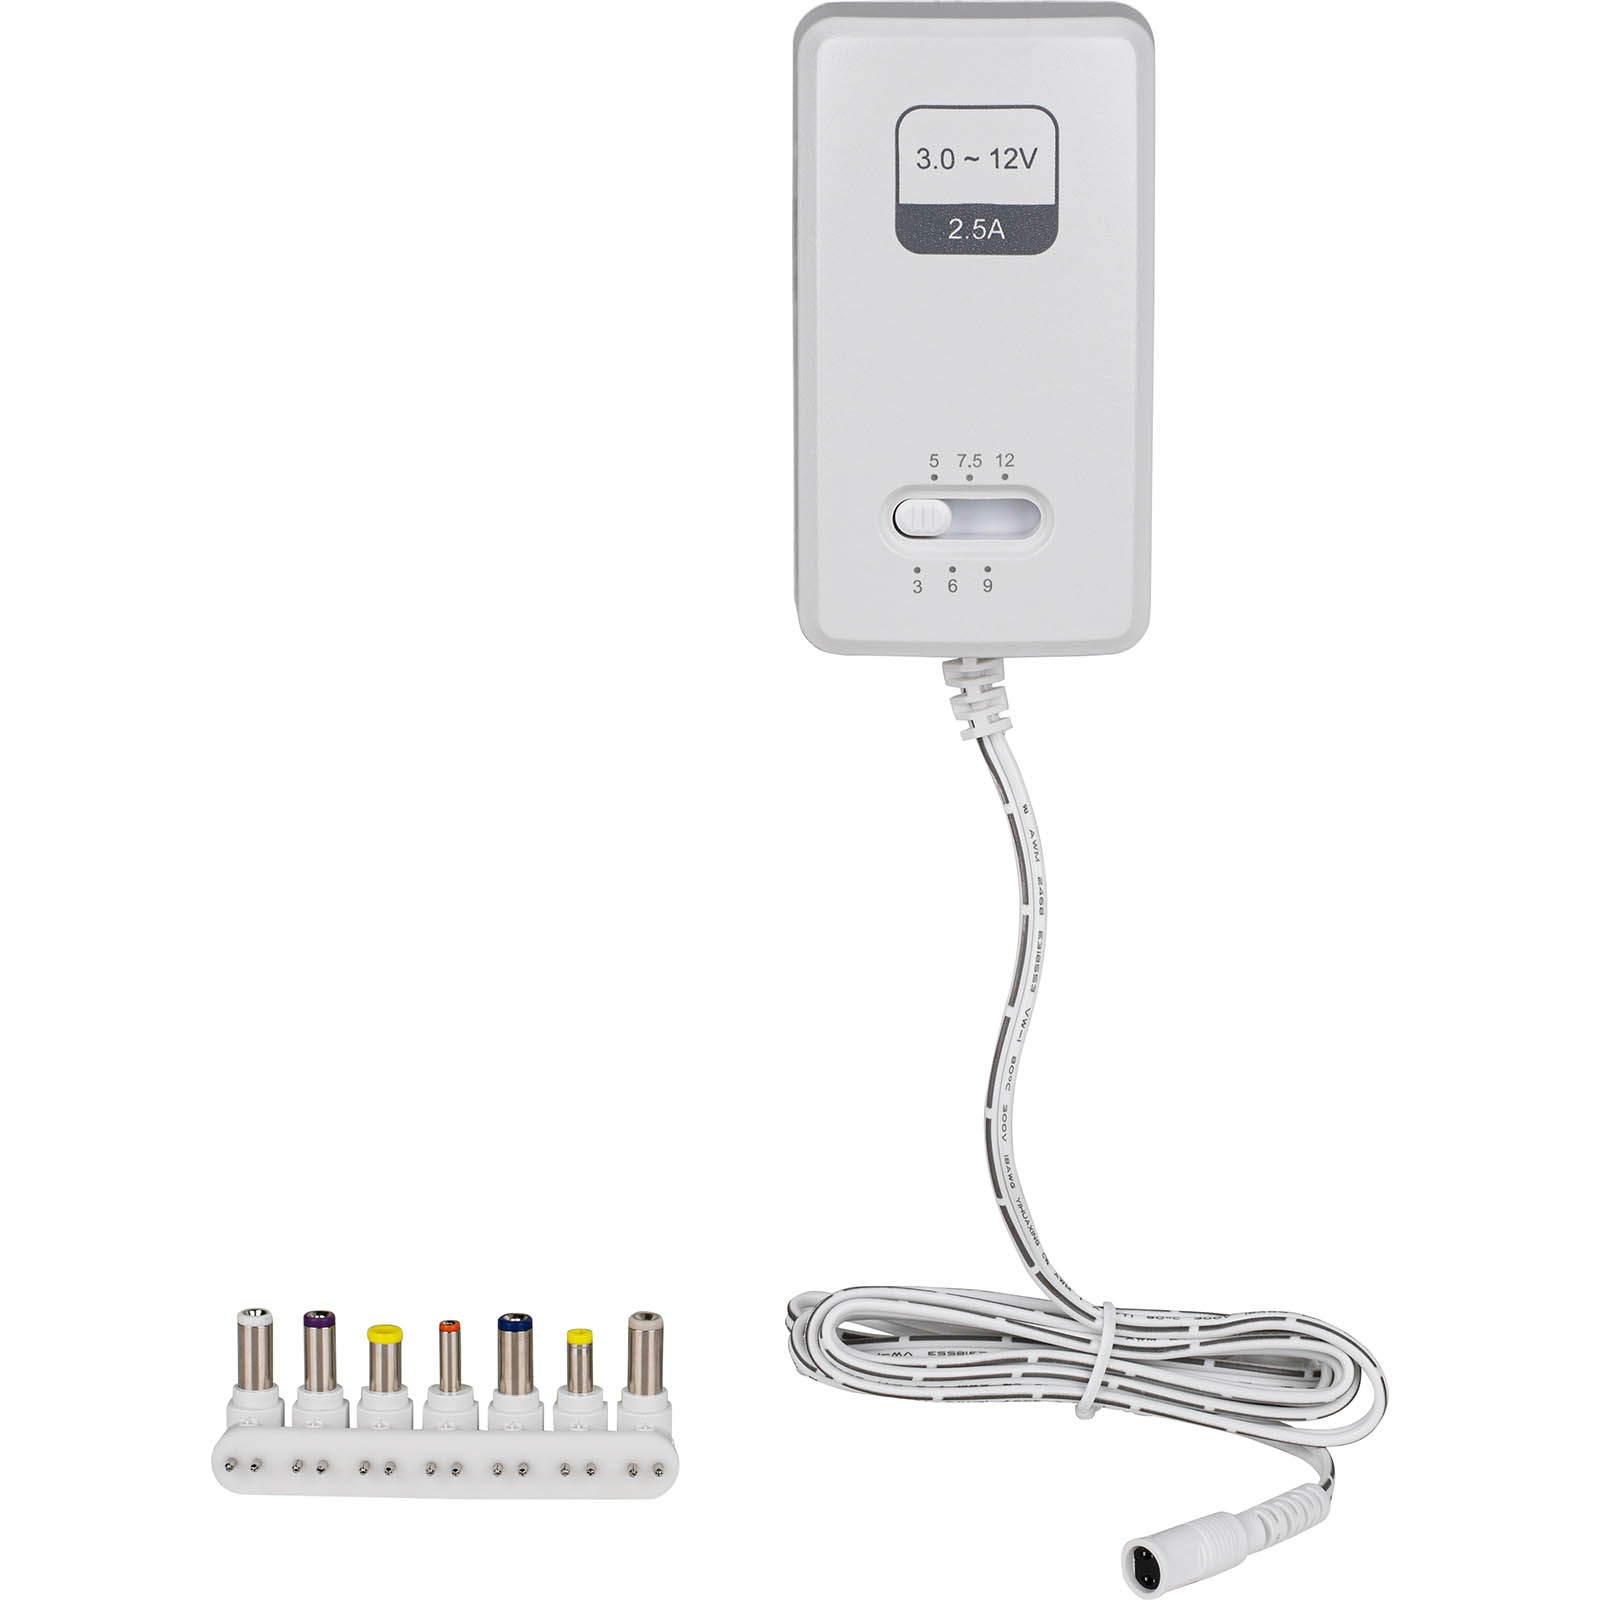 PAD2500WZ 2500mA to DC Power Adapter-White 7-Tips